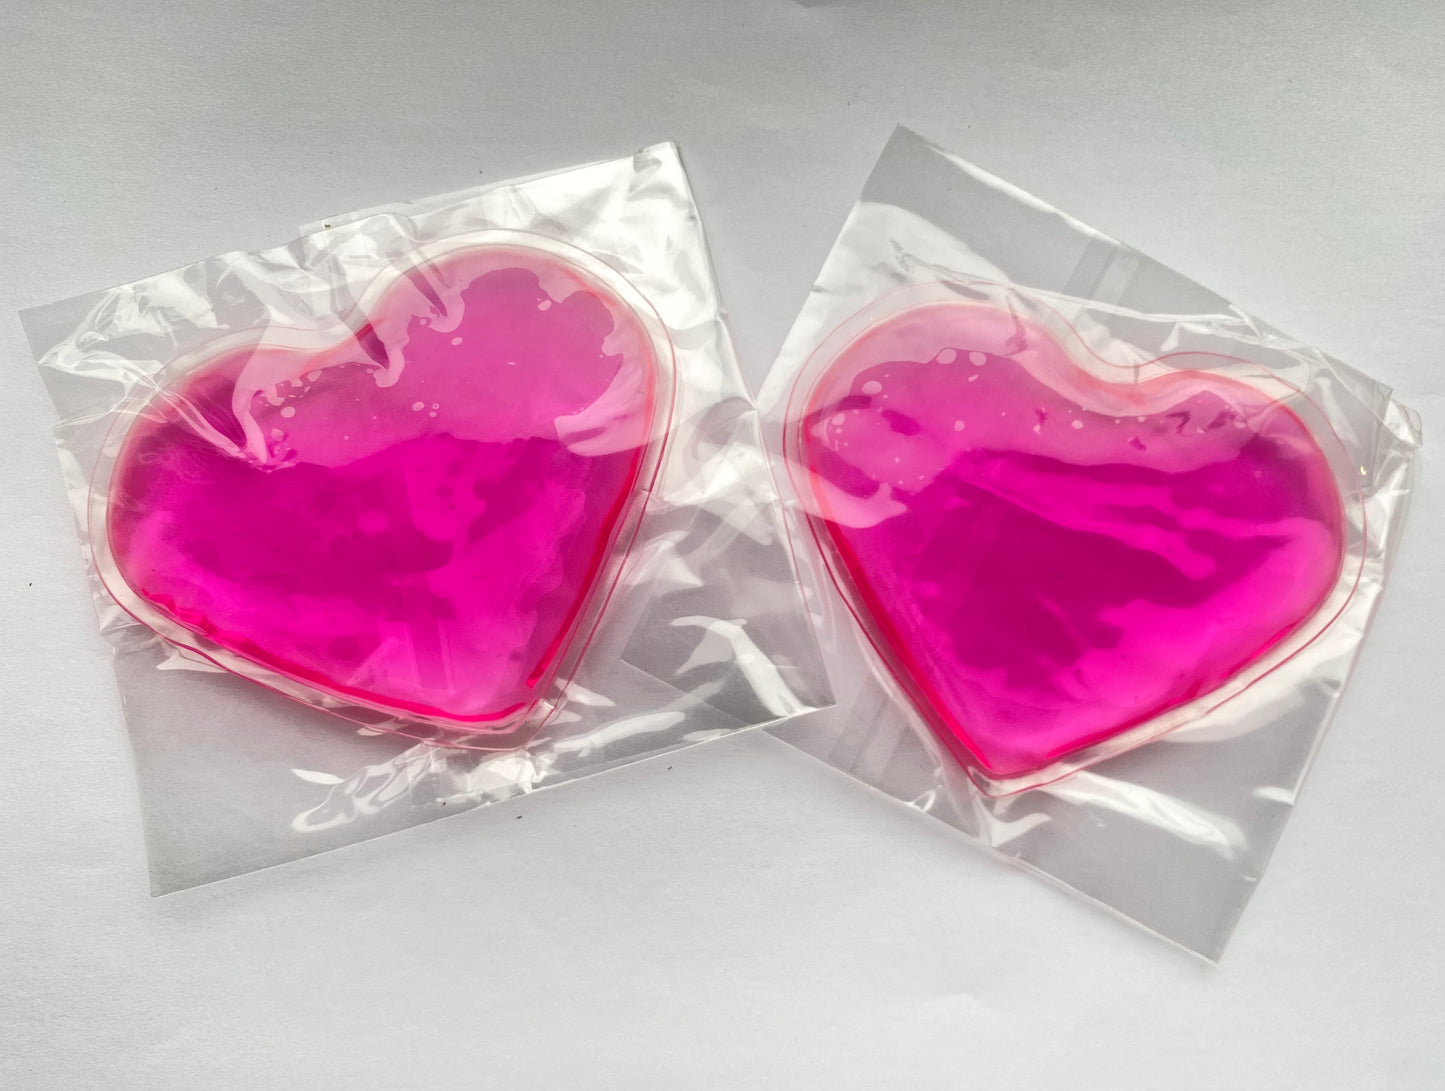 25 FACE EYE ROUND HEART COOL ICE COMPRESSES (WITHOUT PERSONALISATION)